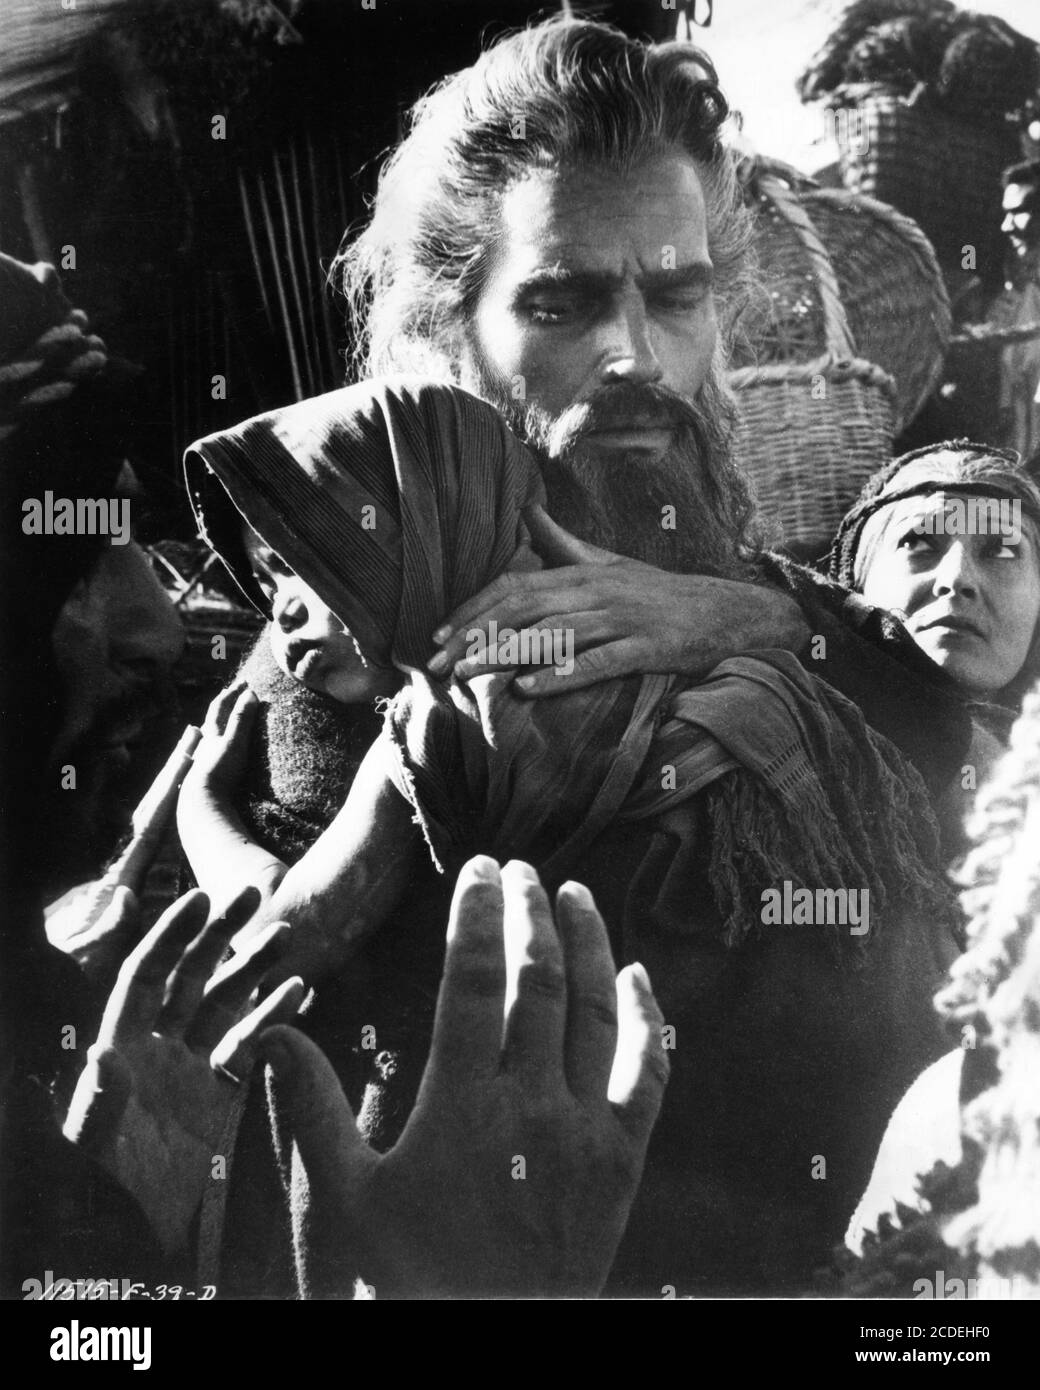 CHARLTON HESTON as Moses carrying baby child in Exodus scene from THE TEN  COMMANDMENTS 1956 director CECIL B. DeMILLE Motion Picture Associates /  Paramount Pictures Stock Photo - Alamy